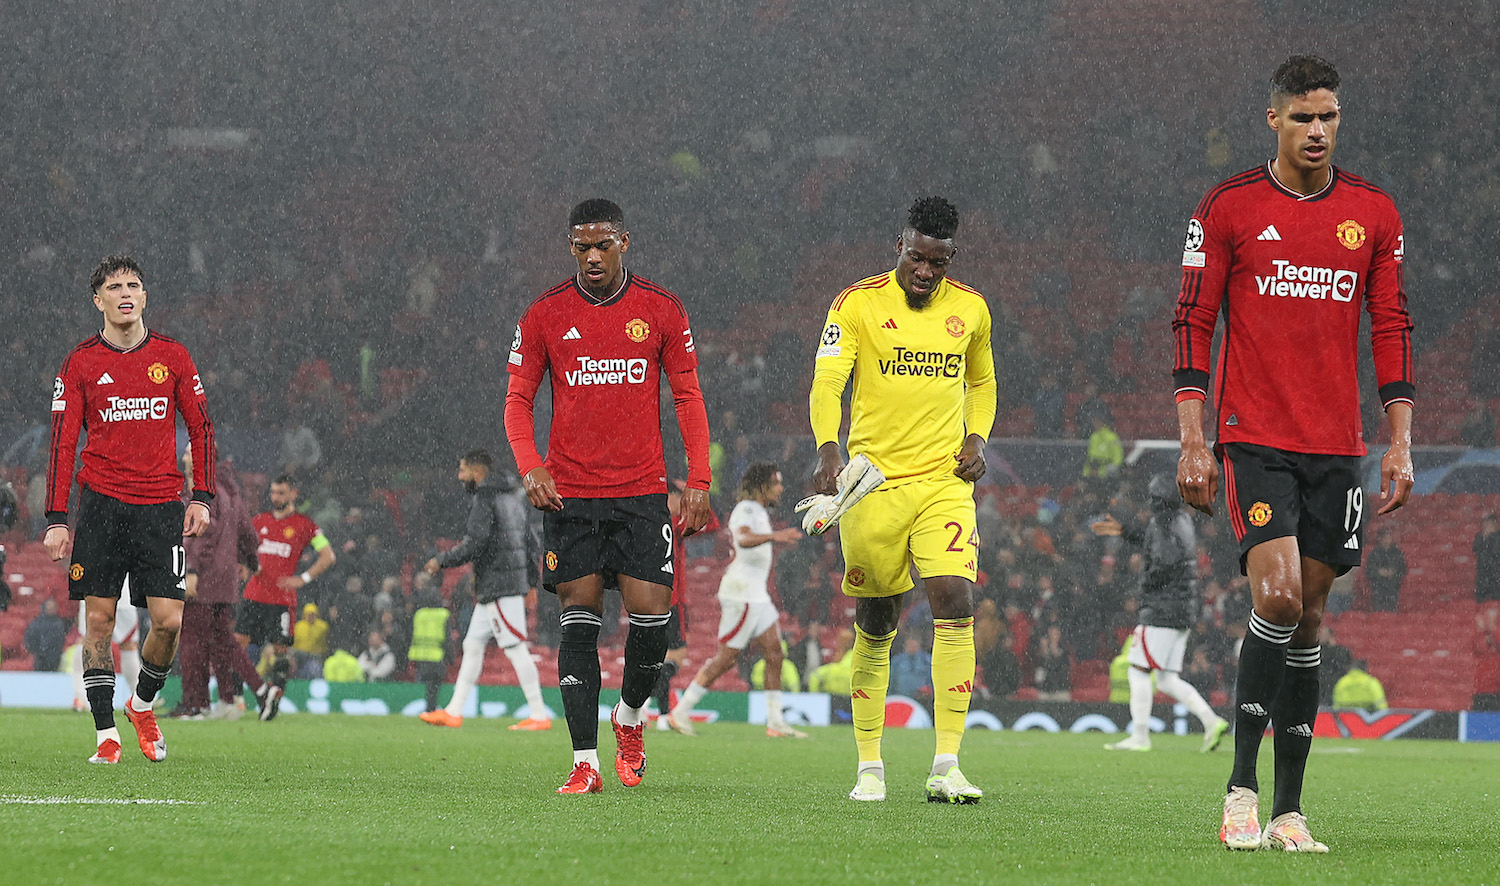 MANCHESTER, ENGLAND - OCTOBER 03: Anthony Martial, Andre Onana of Manchester United walks off during the UEFA Champions League match between Manchester United and Galatasaray A.S. at Old Trafford on October 03, 2023 in Manchester, England. (Photo by Matthew Peters/Manchester United via Getty Images)